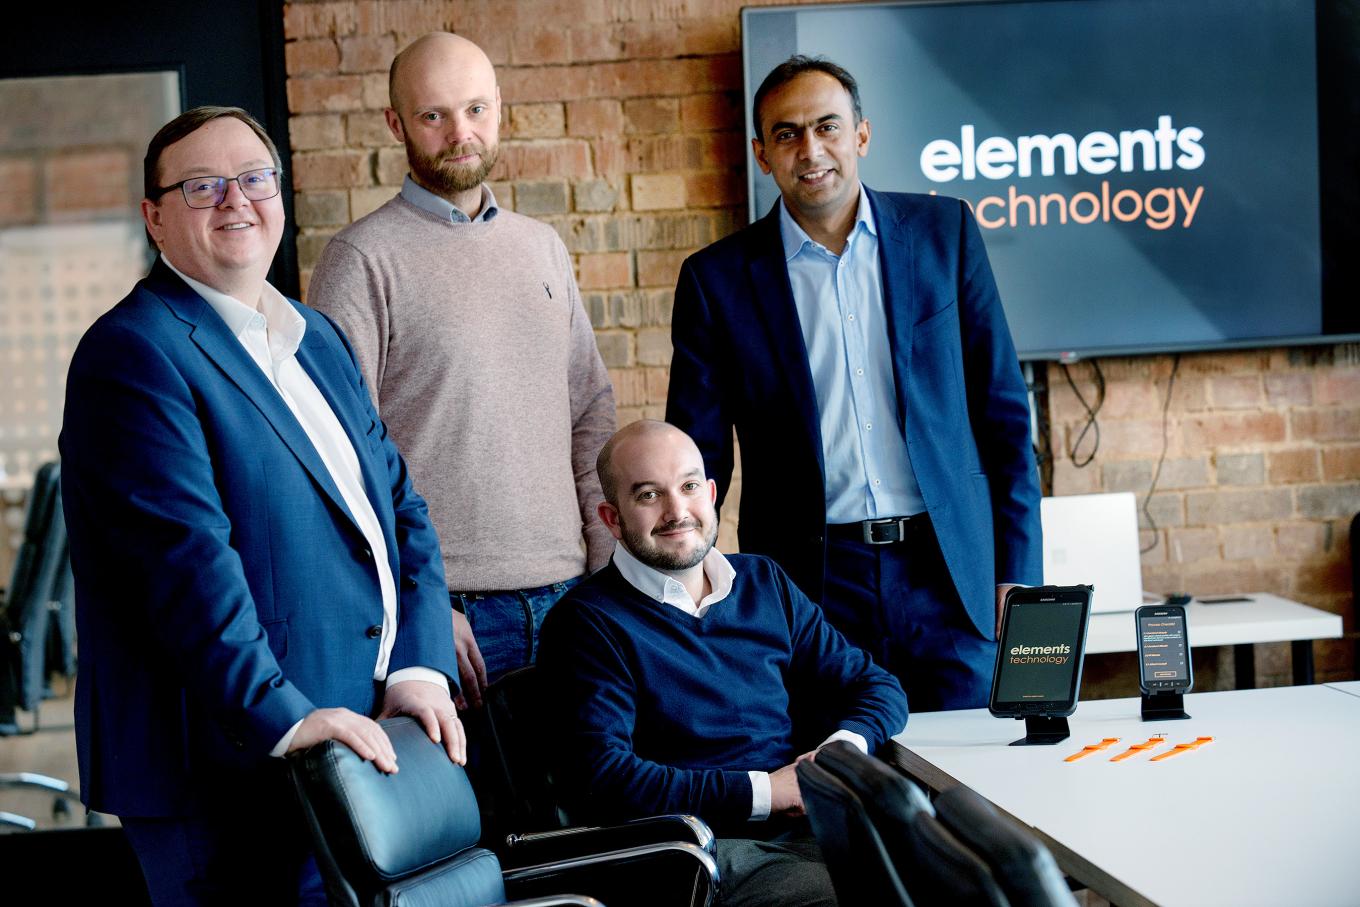 Group photo of Elements Technology founders